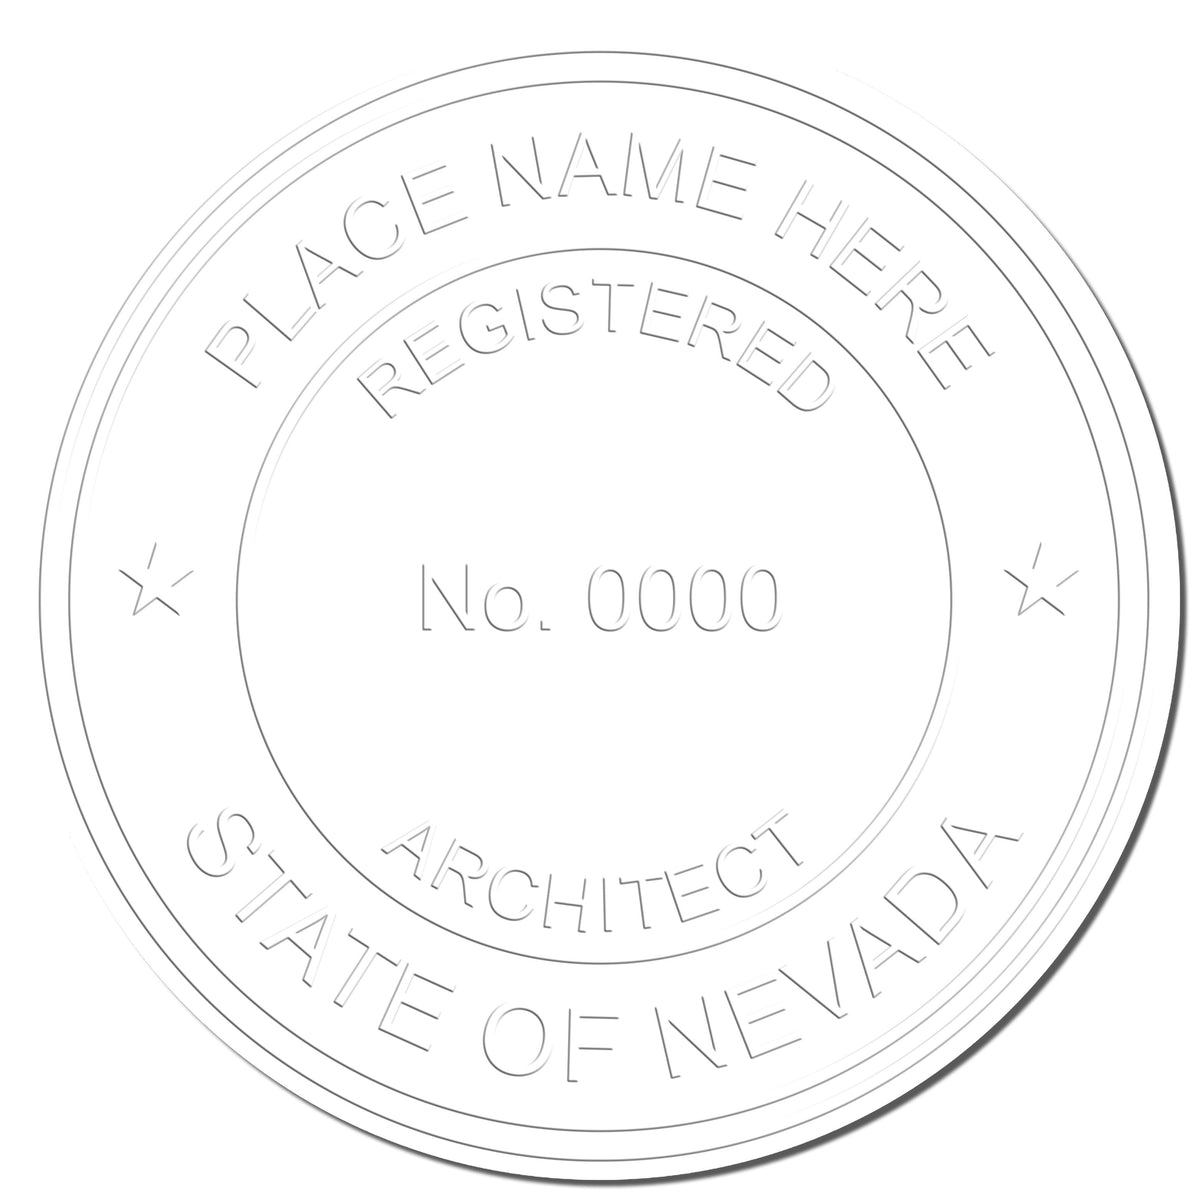 This paper is stamped with a sample imprint of the Gift Nevada Architect Seal, signifying its quality and reliability.